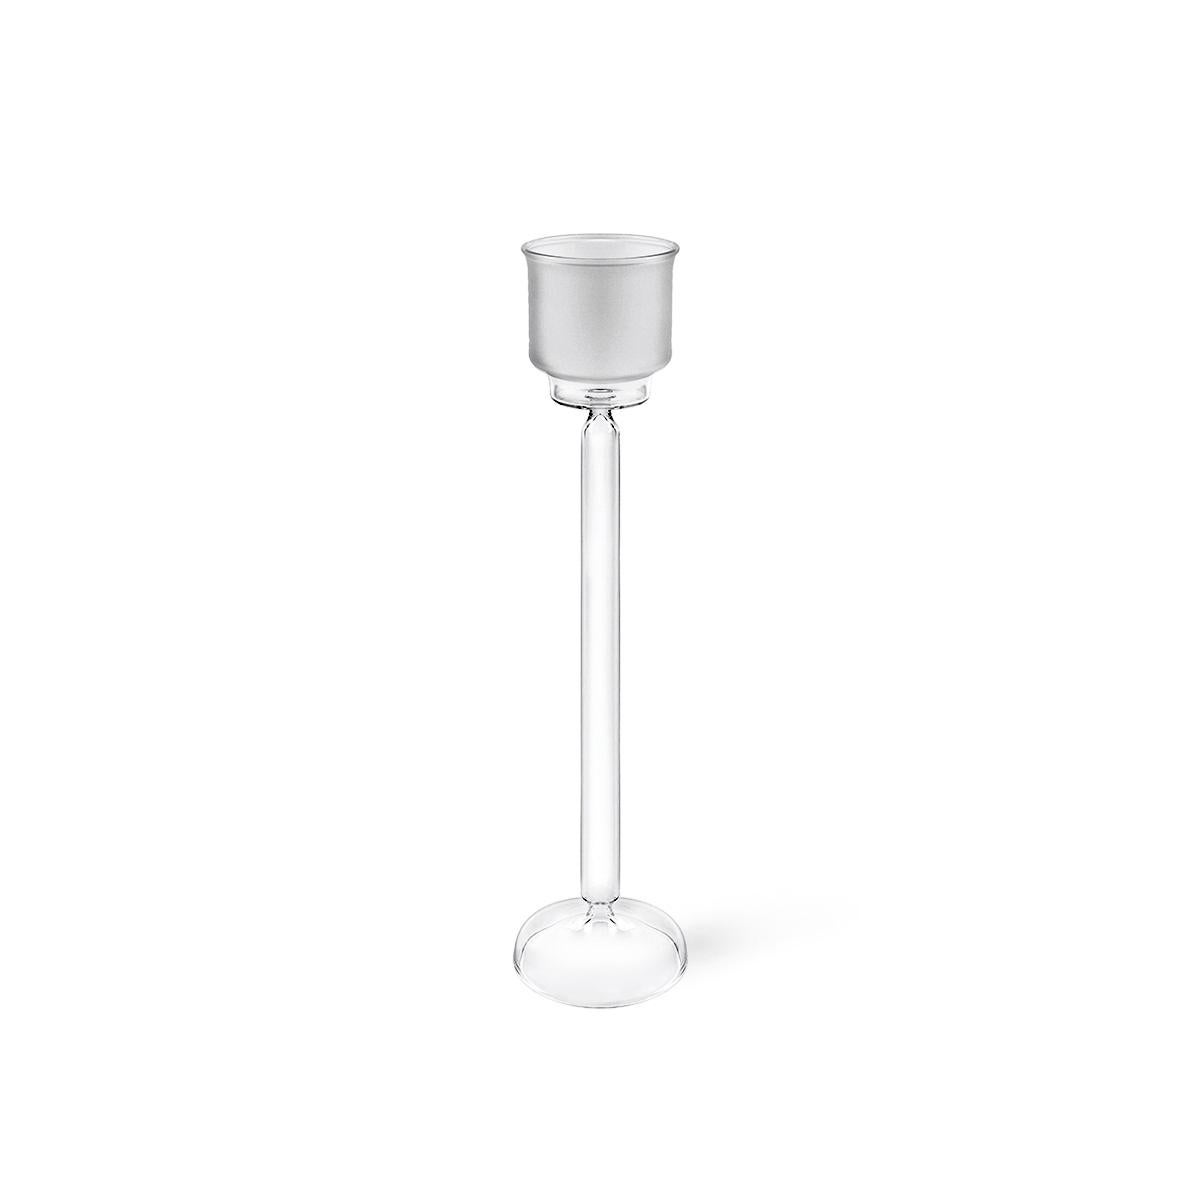 Modern Ambra Handmade Blown Glass Candle Holder Designed by Aldo Cibic For Sale